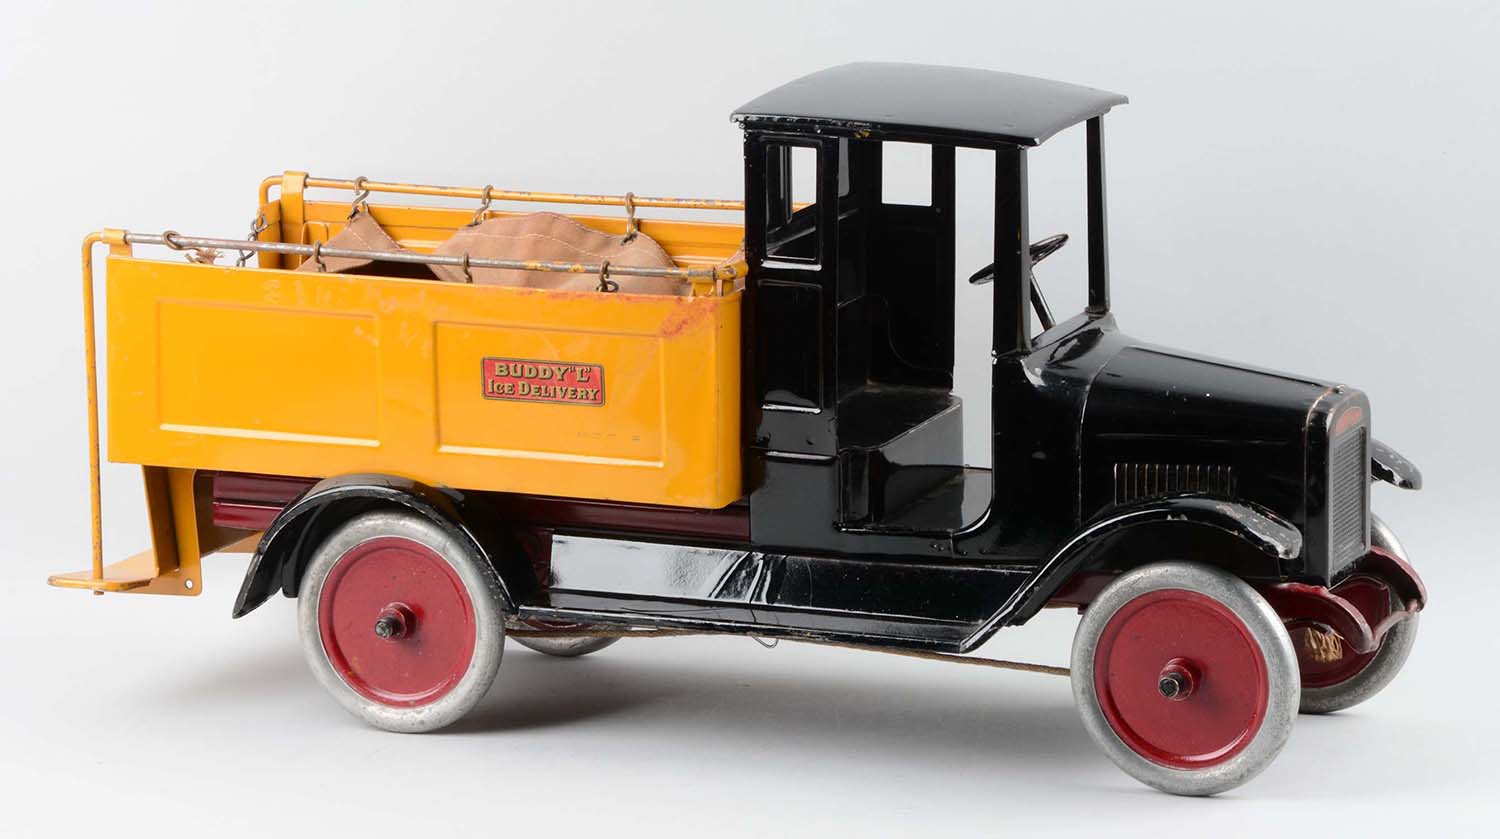 Pressed Steel Buddy L Ice Delivery Truck, Estimated at $2,000-3,000.